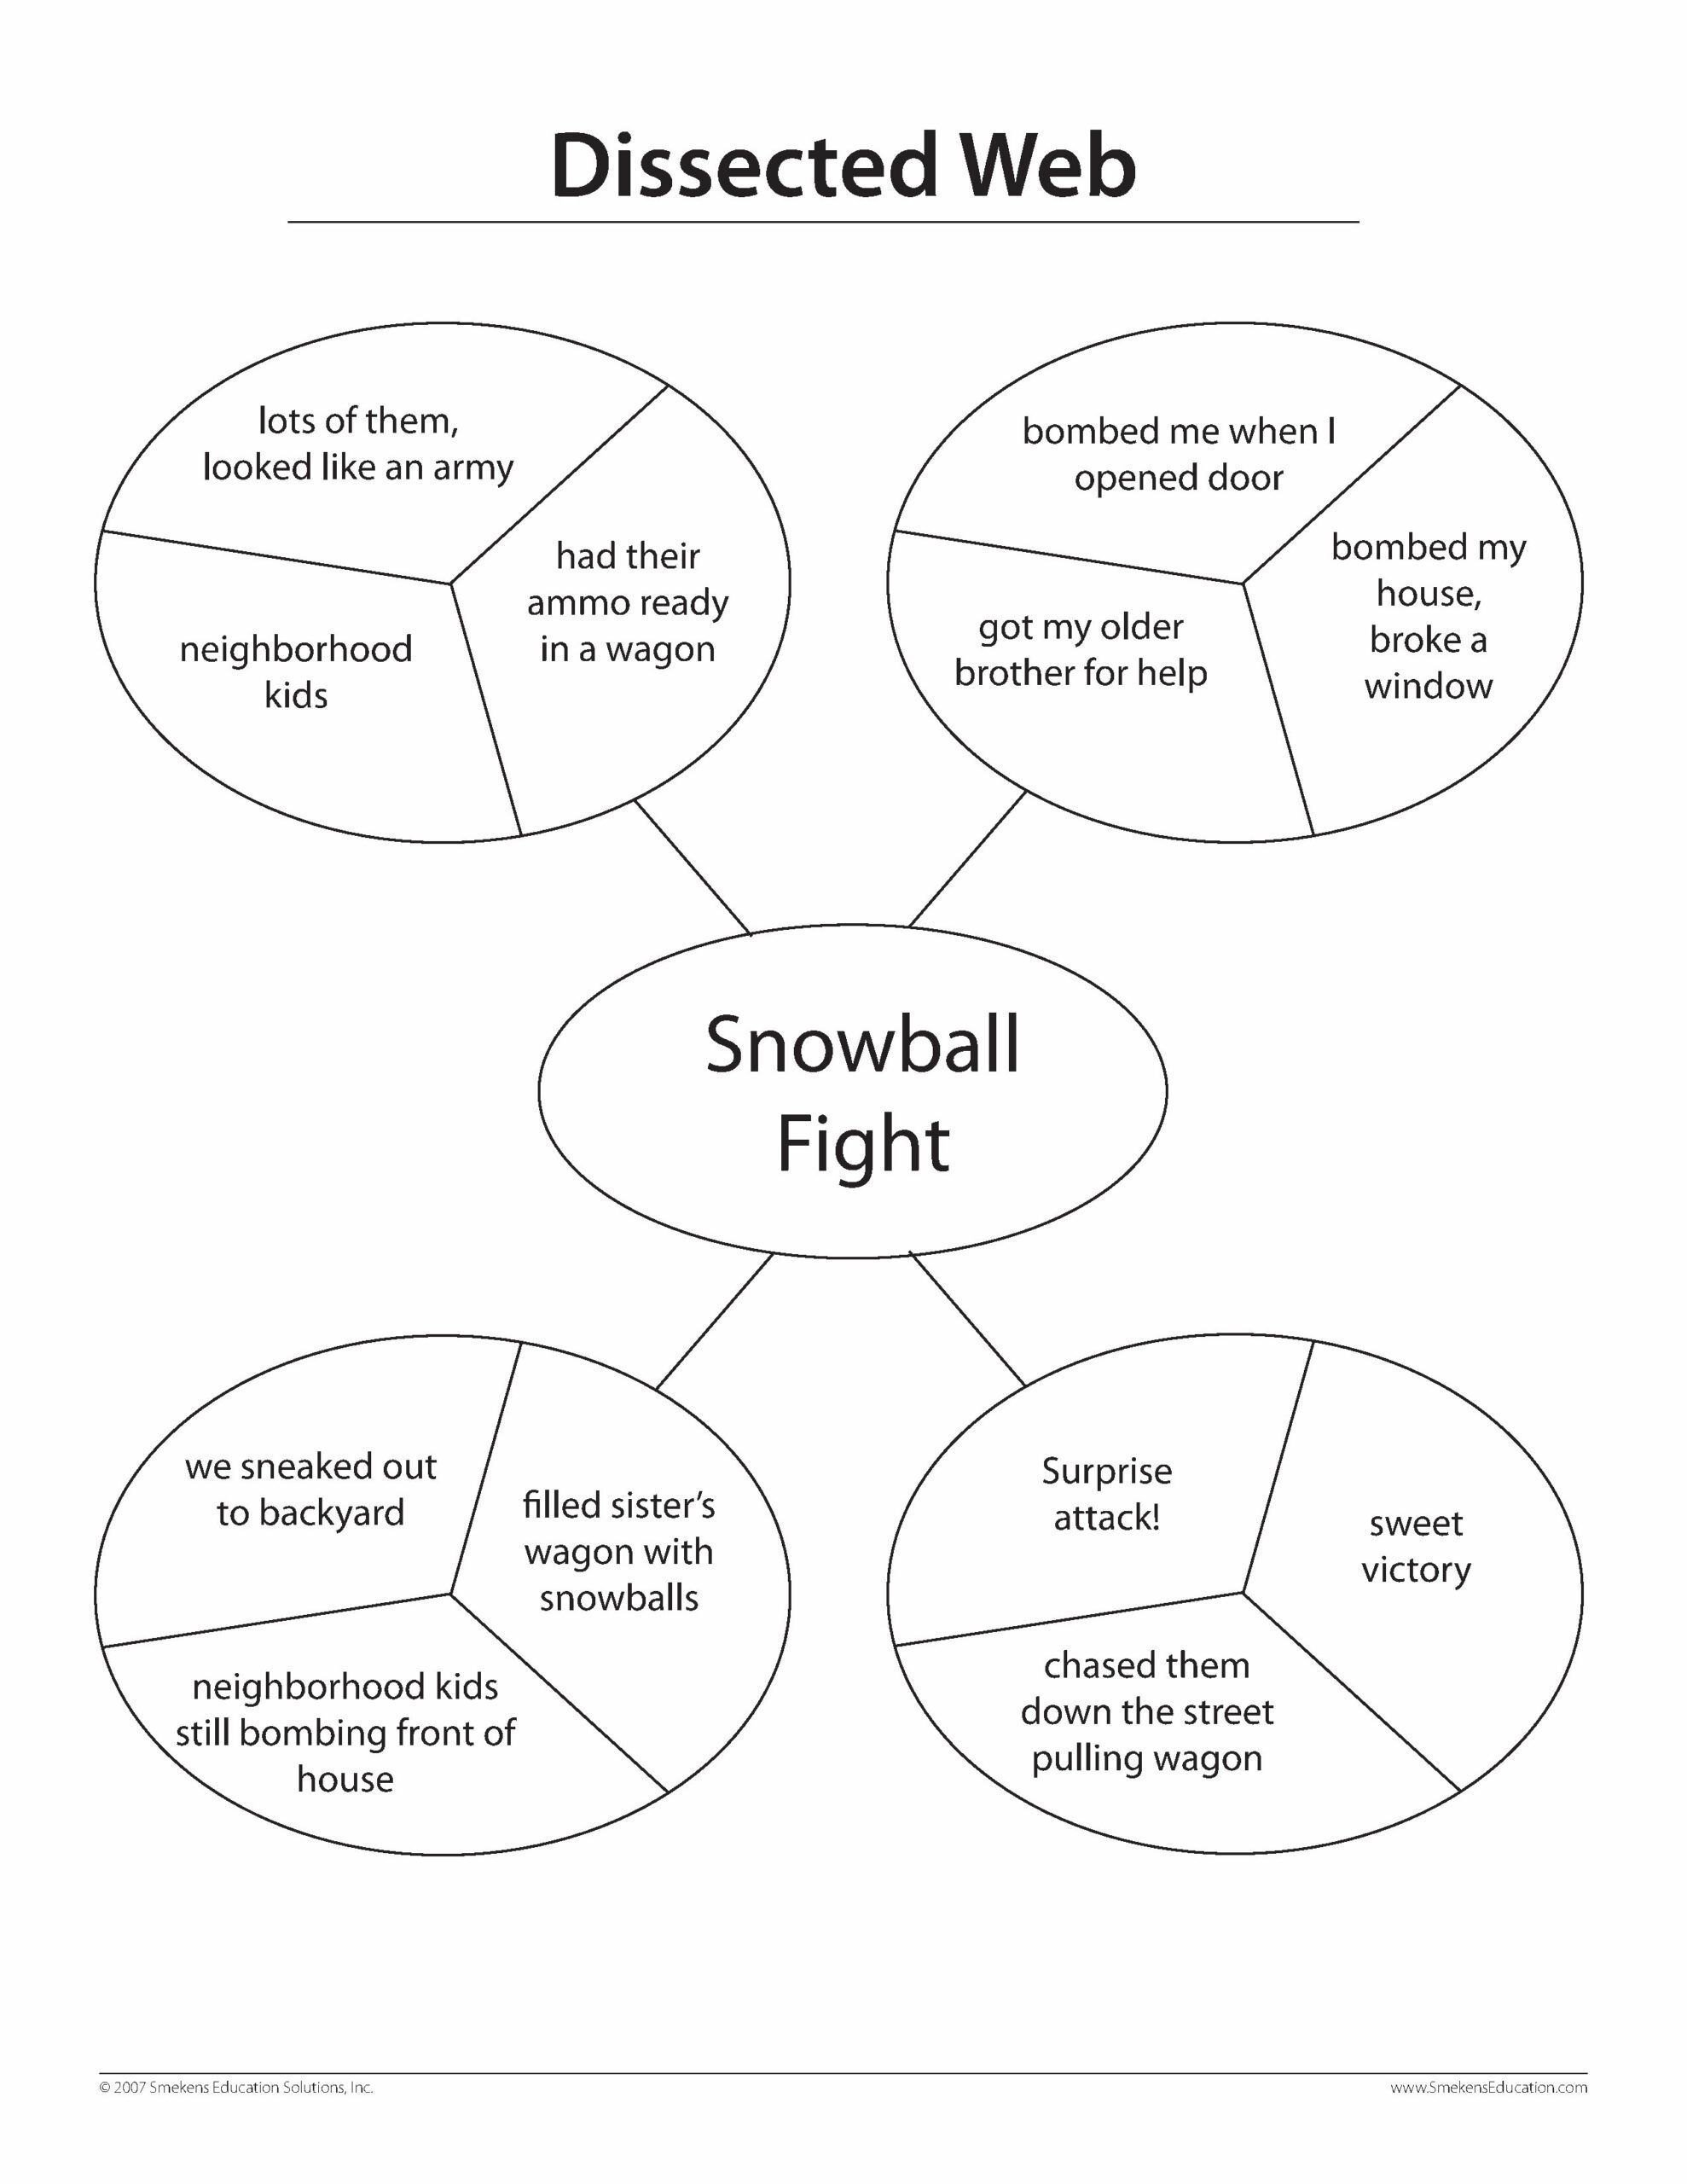 Dissected Web Snowball Fight Revision Pre-Write